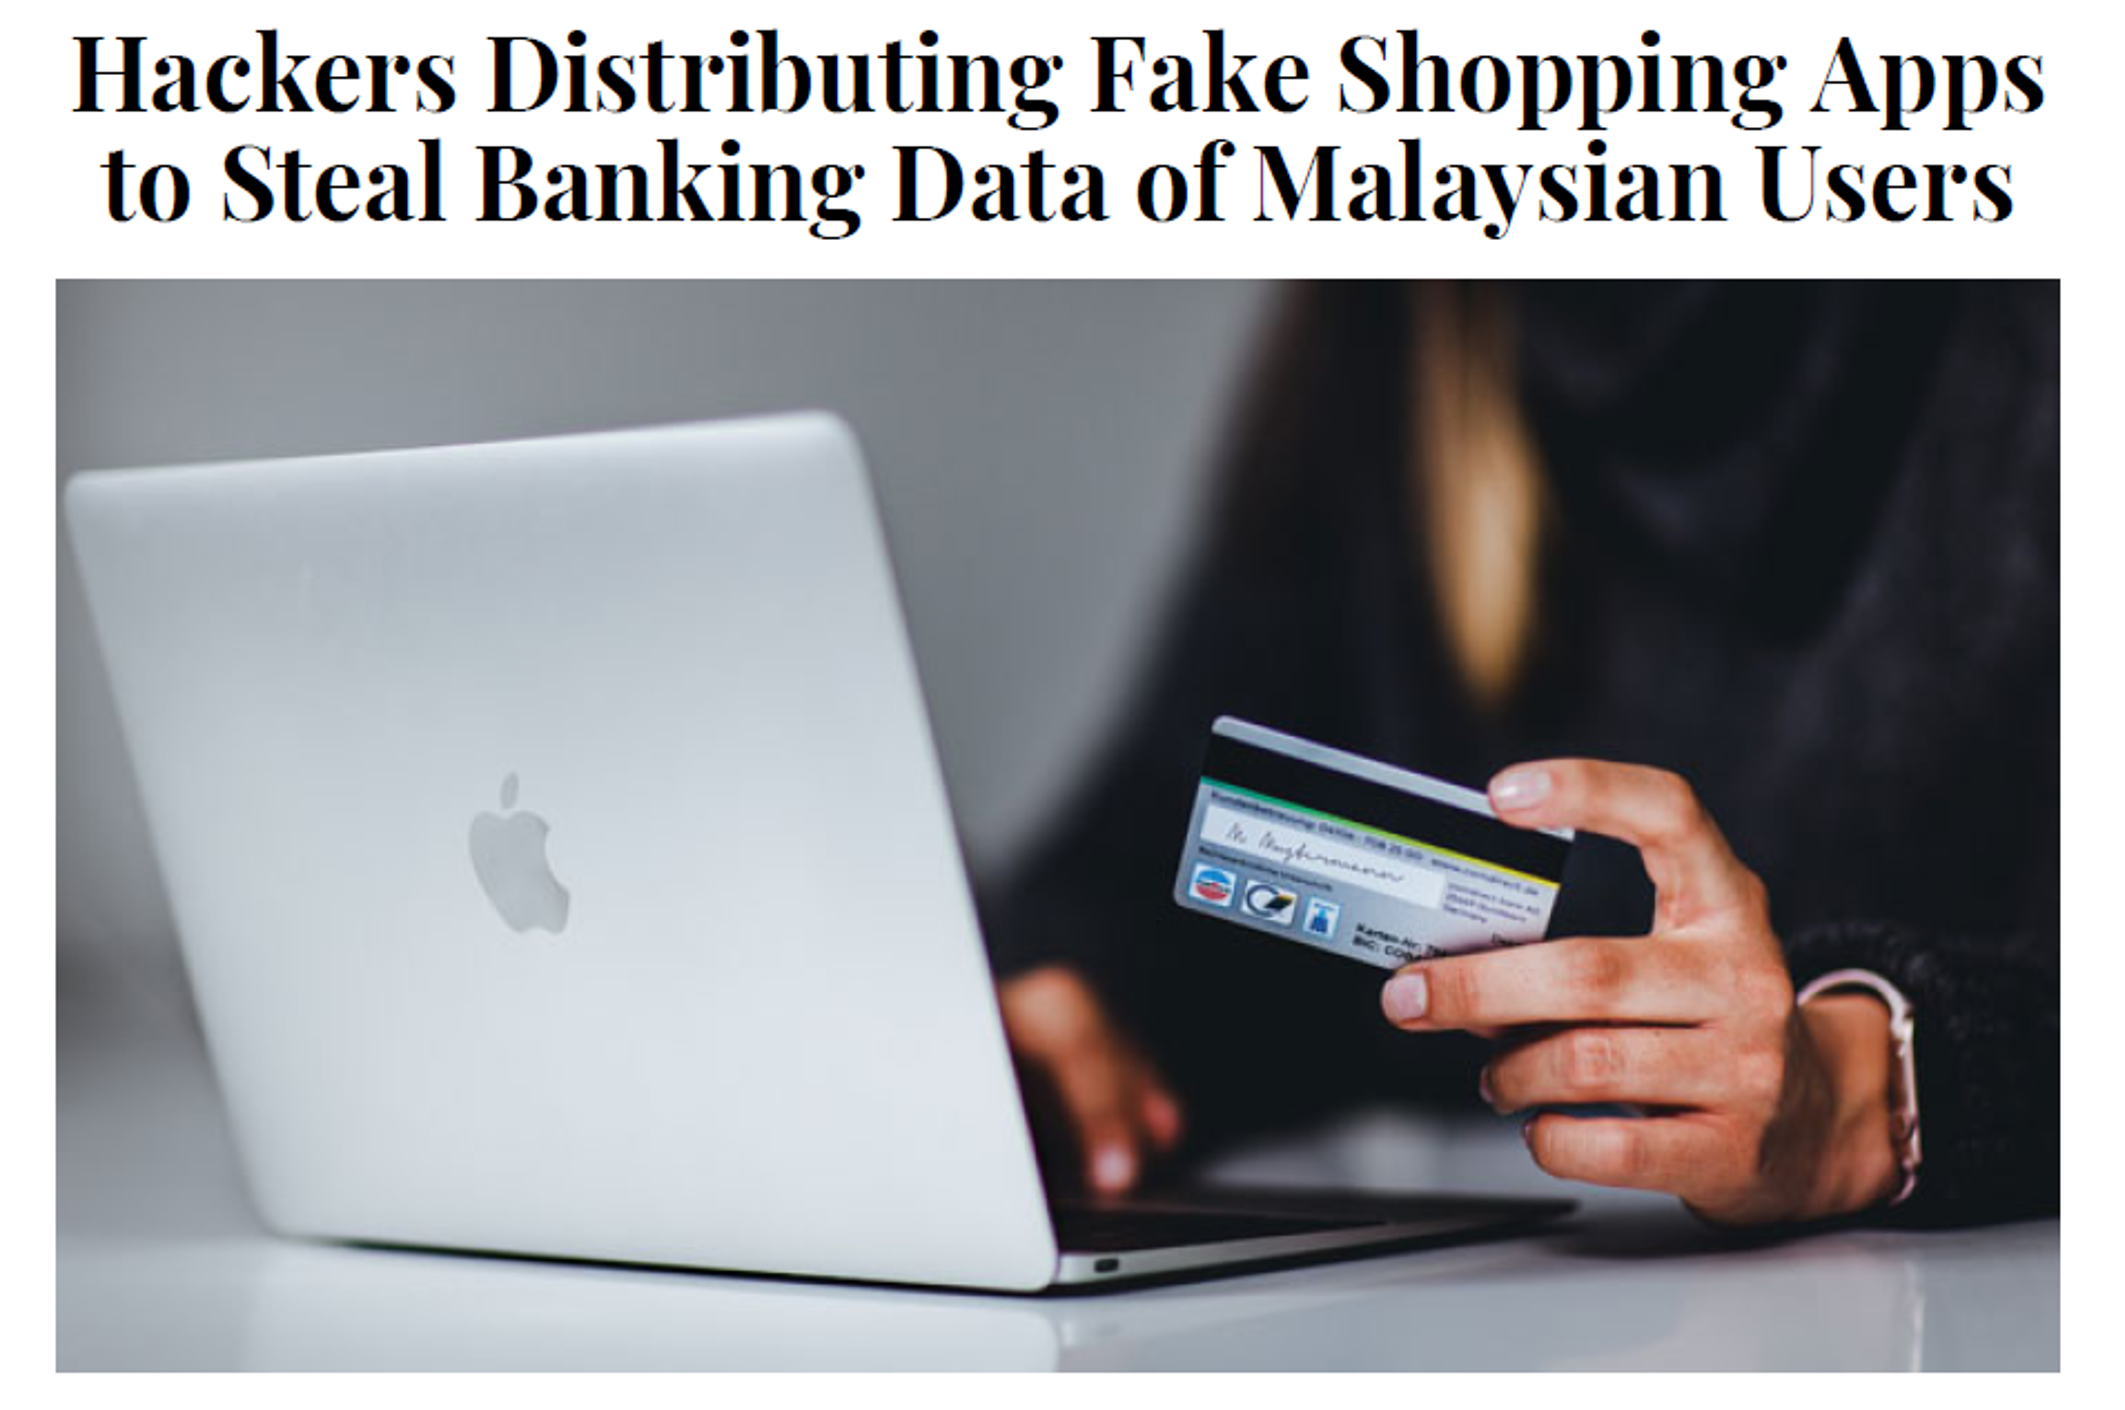 April 2022: Hackers Distributing Fake Shopping Apps to Steal Banking Data of Malaysian Users